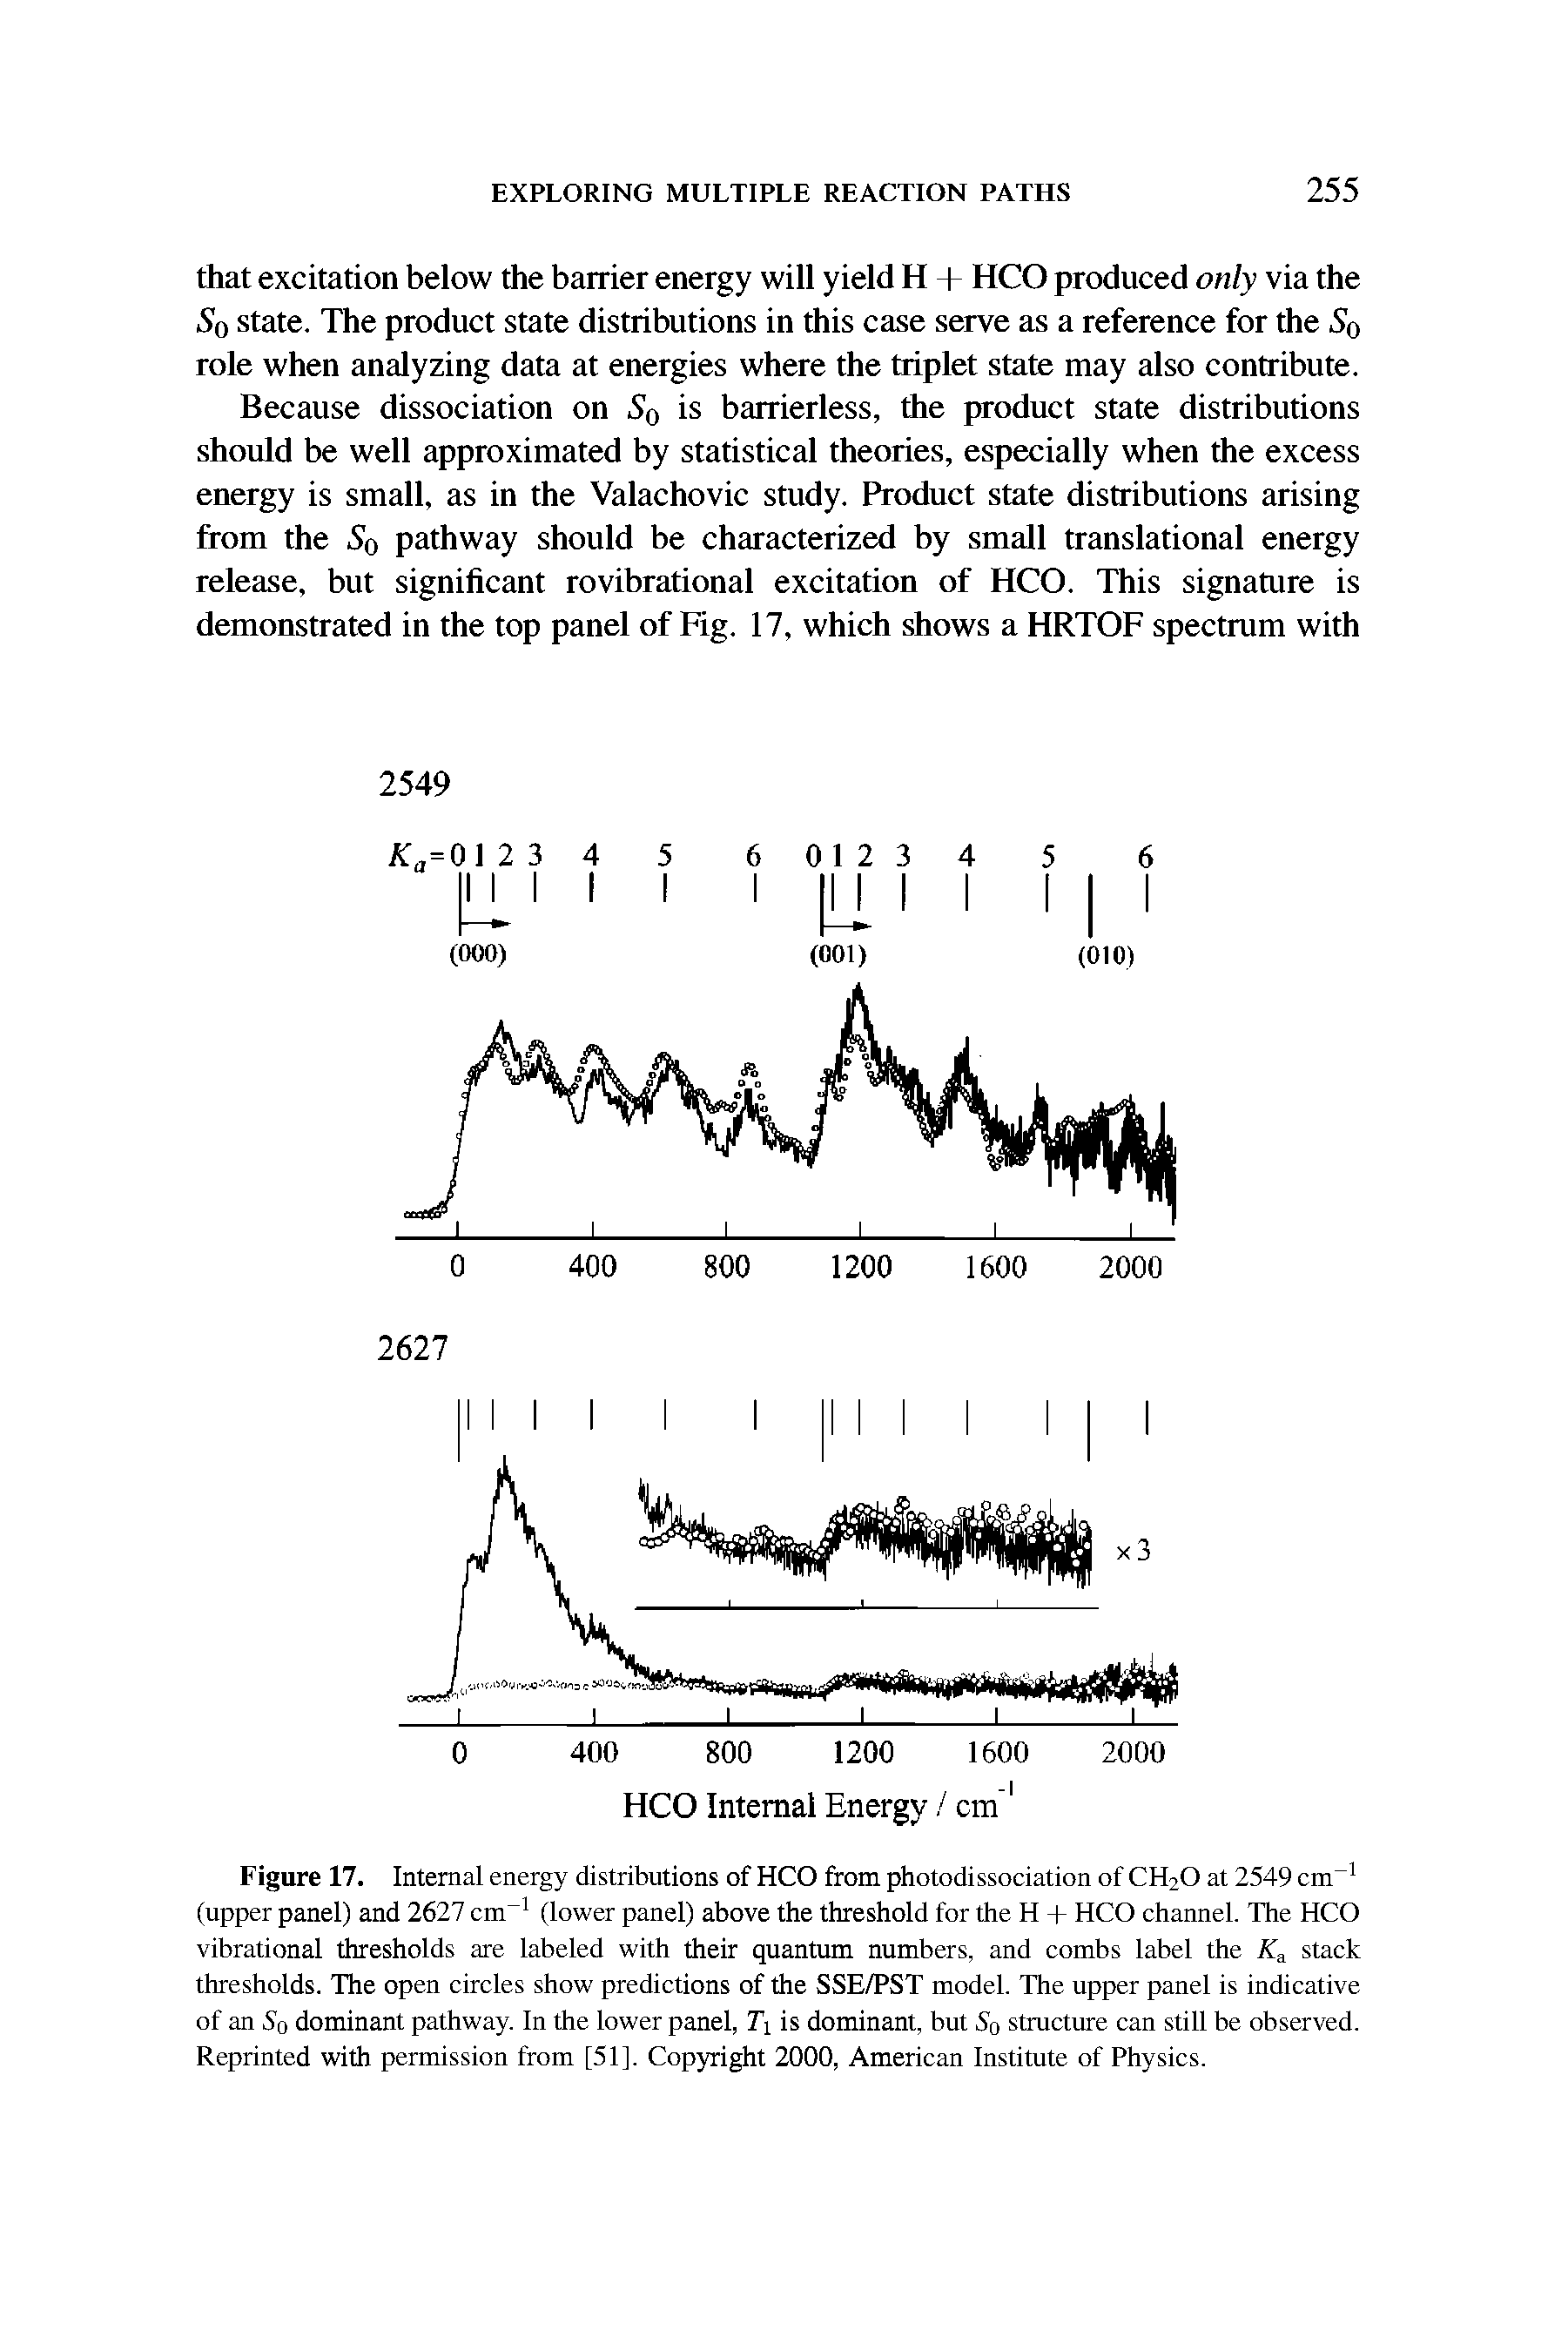 Figure 17. Internal energy distributions of HCO from photodissociation of CH2O at 2549 cm (upper panel) and 2627 cm (lower panel) above the threshold for the H + HCO channel. The HCO vibrational thresholds are labeled with their quantum numbers, and combs label the stack thresholds. The open circles show predictions of the SSE/PST model. The upper panel is indicative of an So dominant pathway. In the lower panel, T is dominant, but So structure can still be observed. Reprinted with permission from [51]. Copyright 2000, American Institute of Physics.